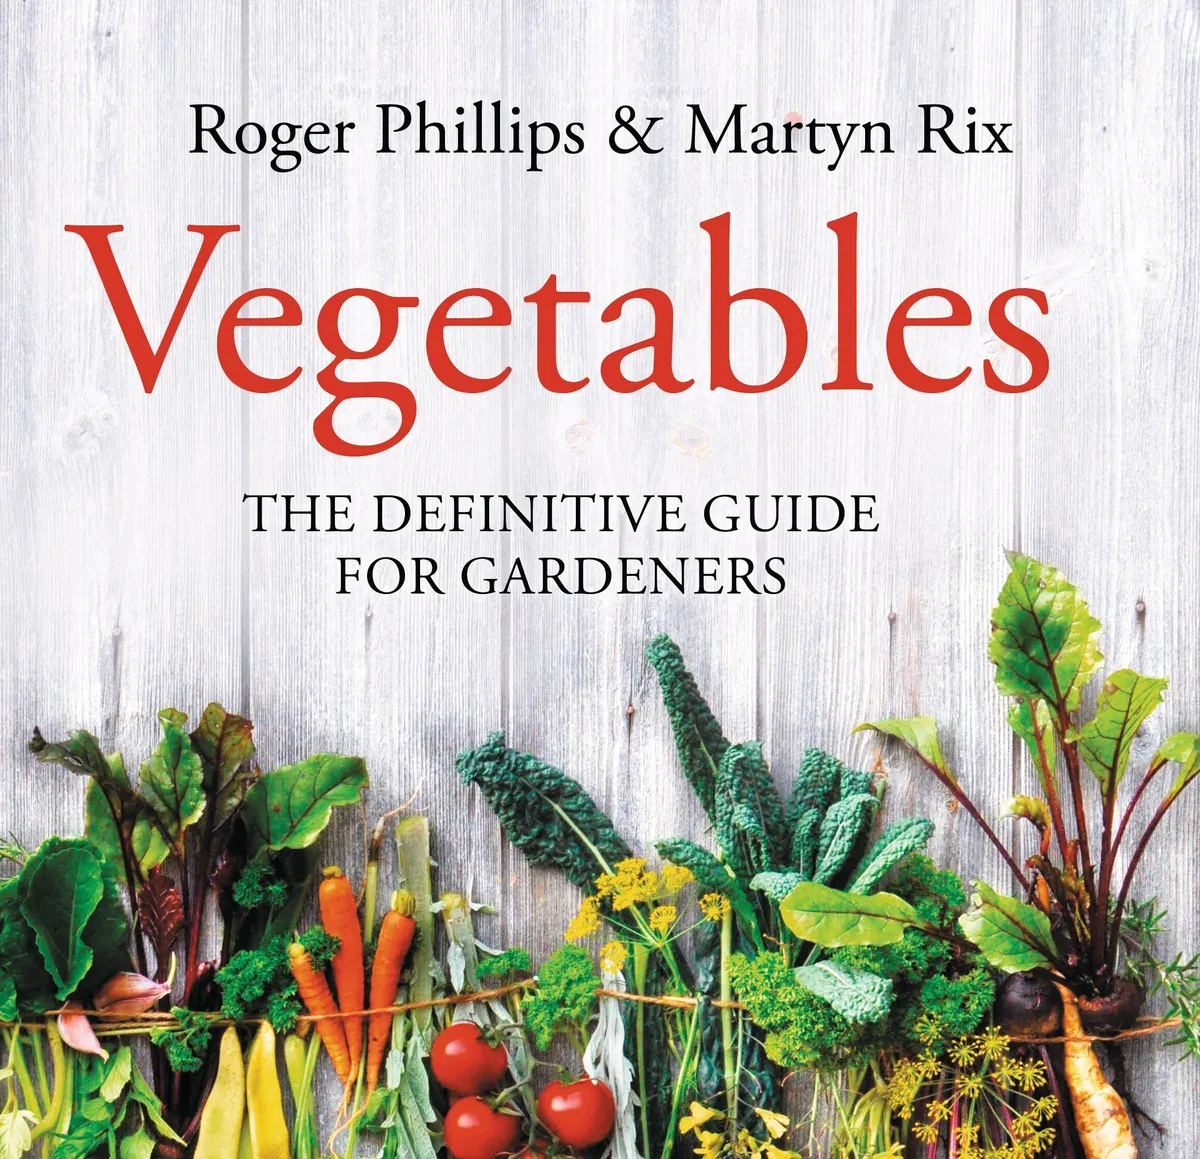 Vegetables by Roger Phillips and Martyn Rix